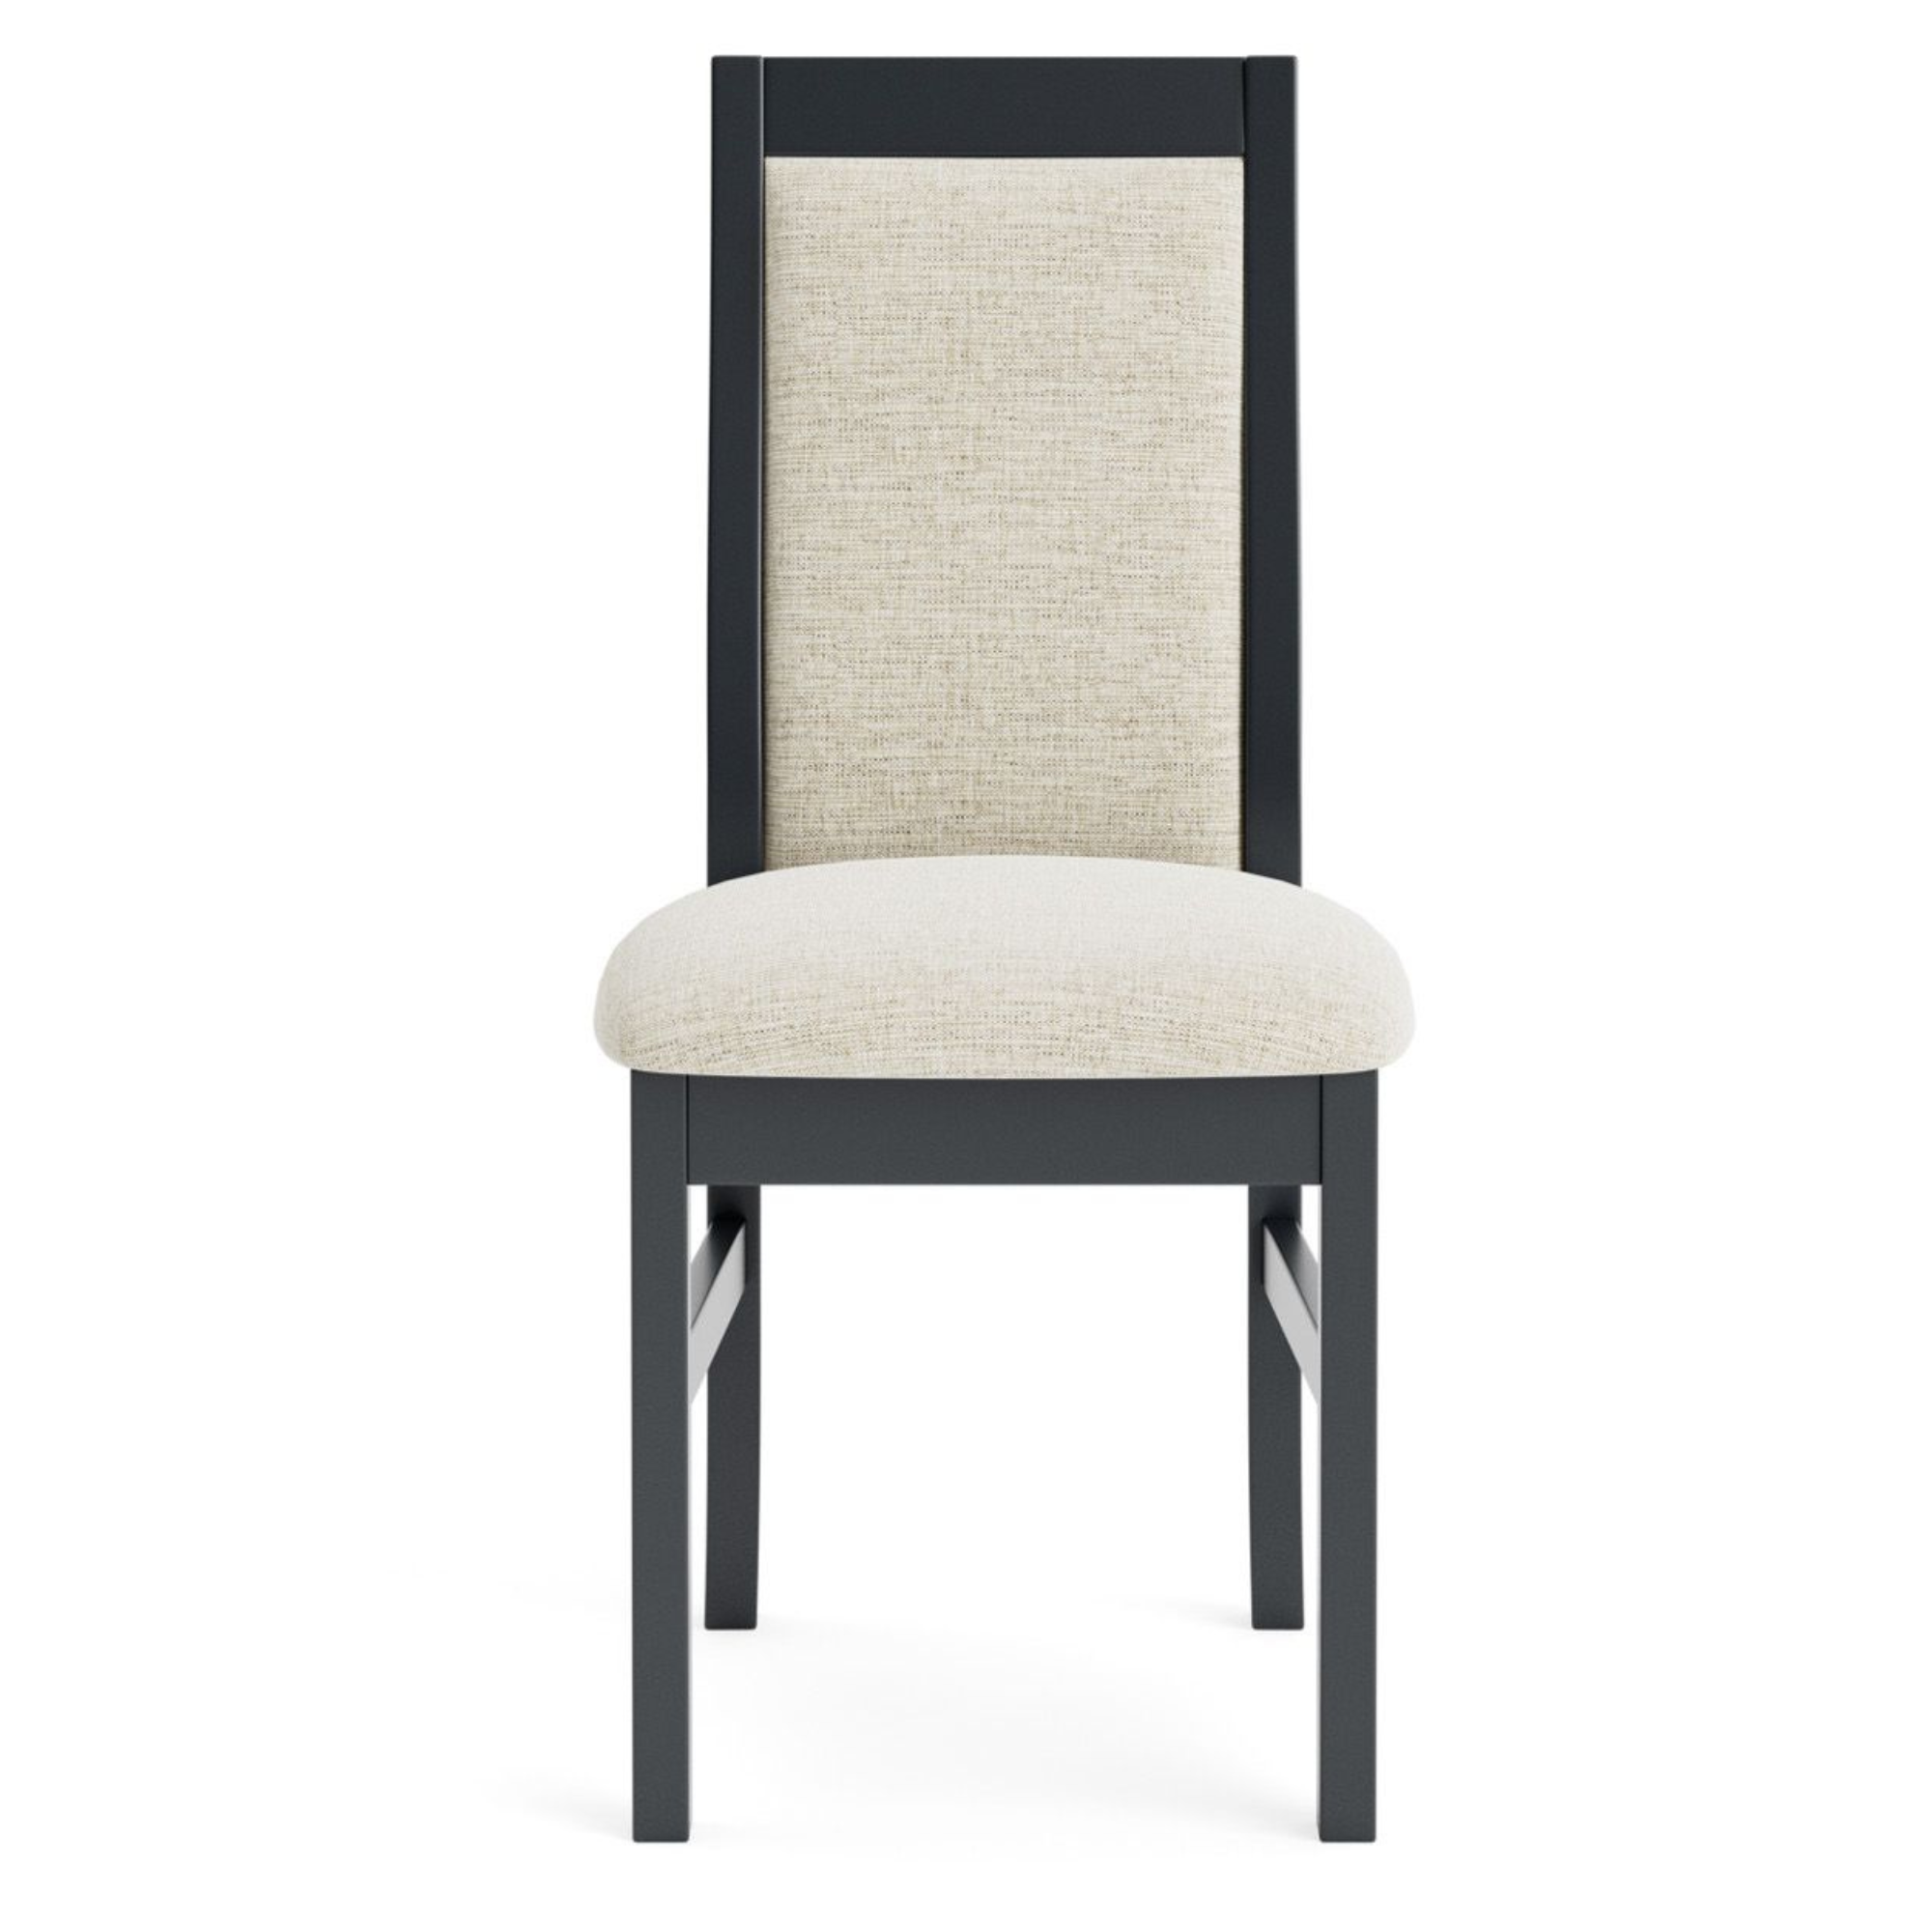 CHARLTON PADDED BACK DINING CHAIR | CHOOSE YOUR OWN FABRIC | NZ MADE